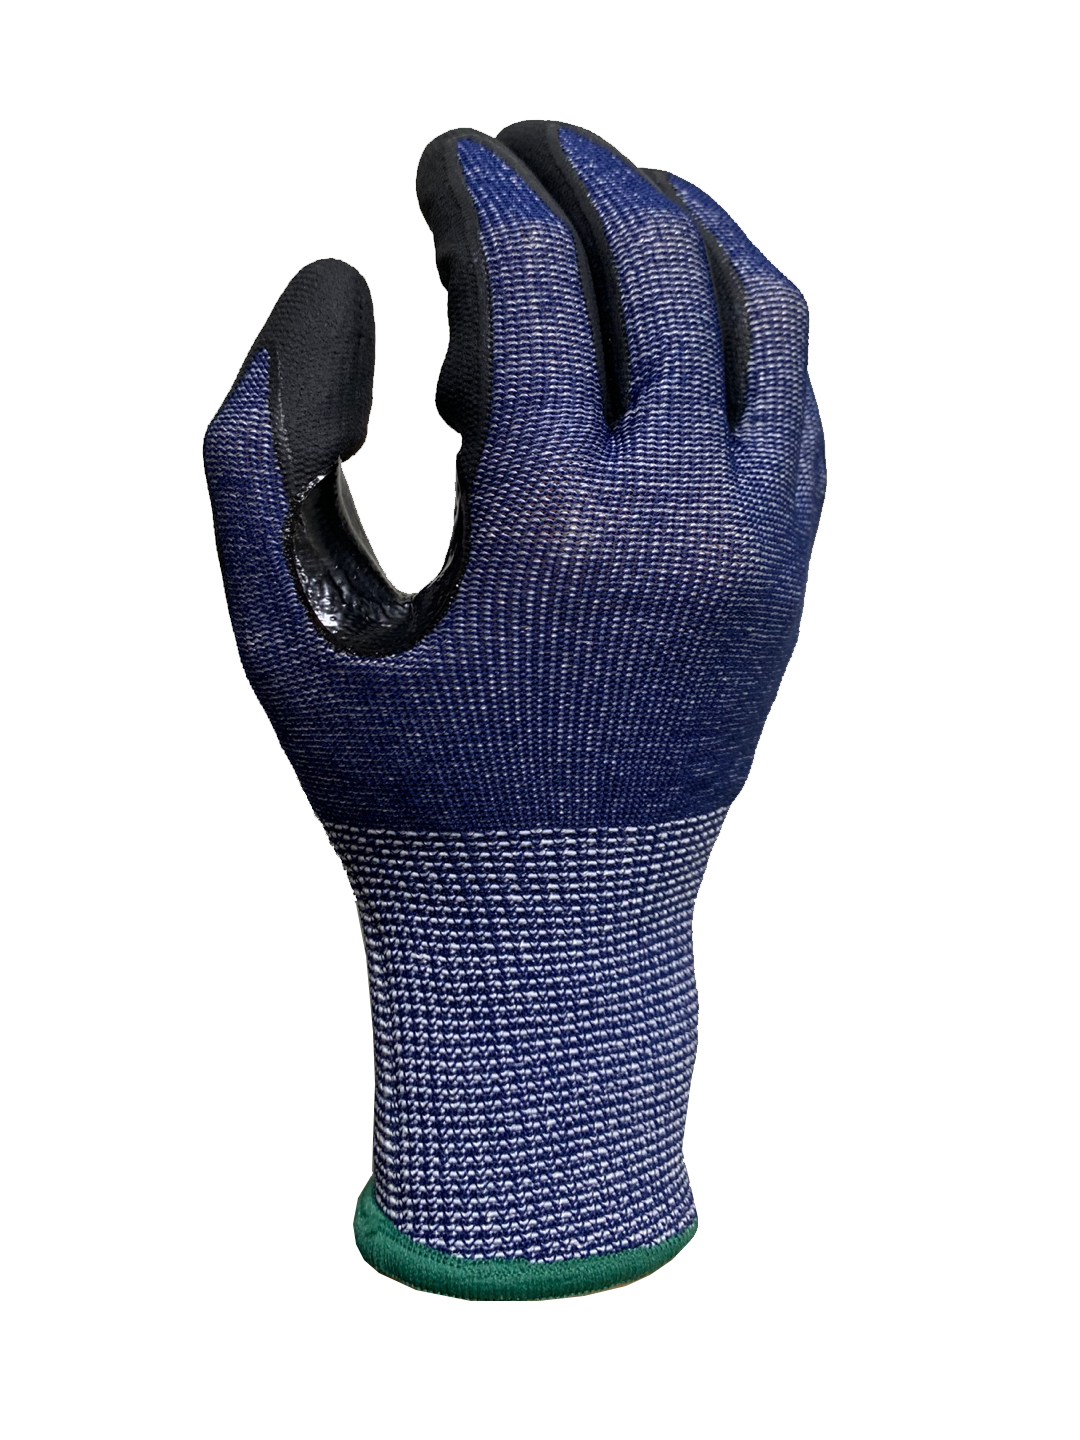 CUT5 Navy blue liner with black nitrile micro finish (reinforcement patch) glove